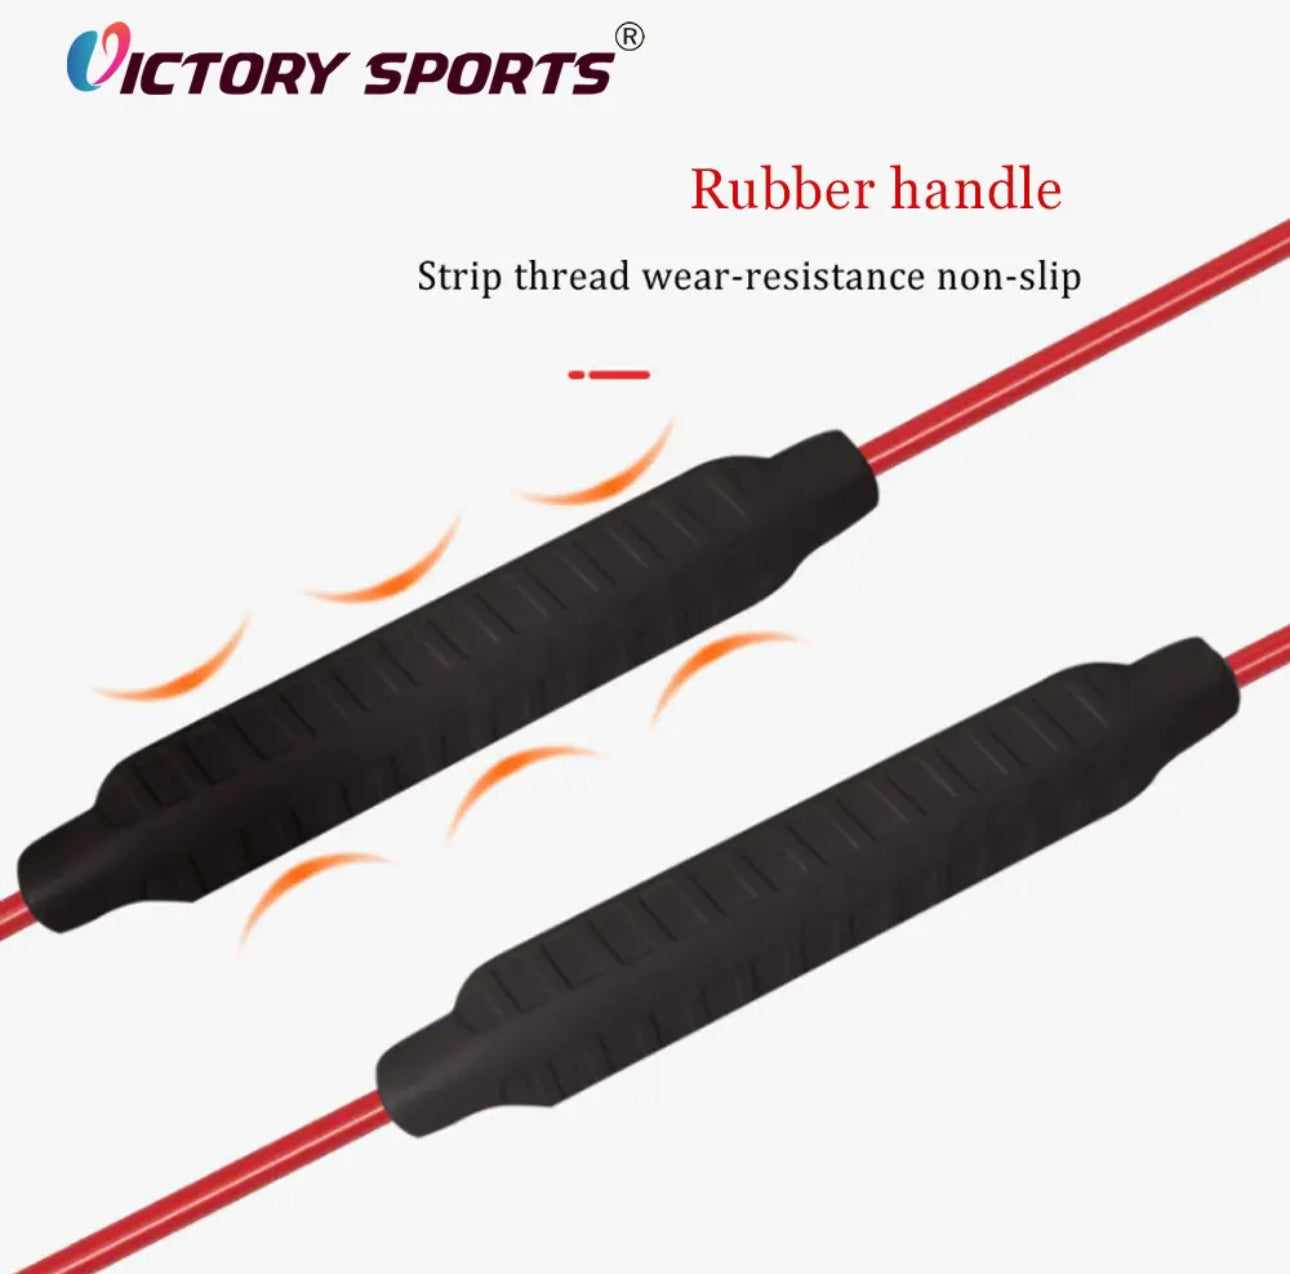 Velo Stick Activation & Recovery Tool